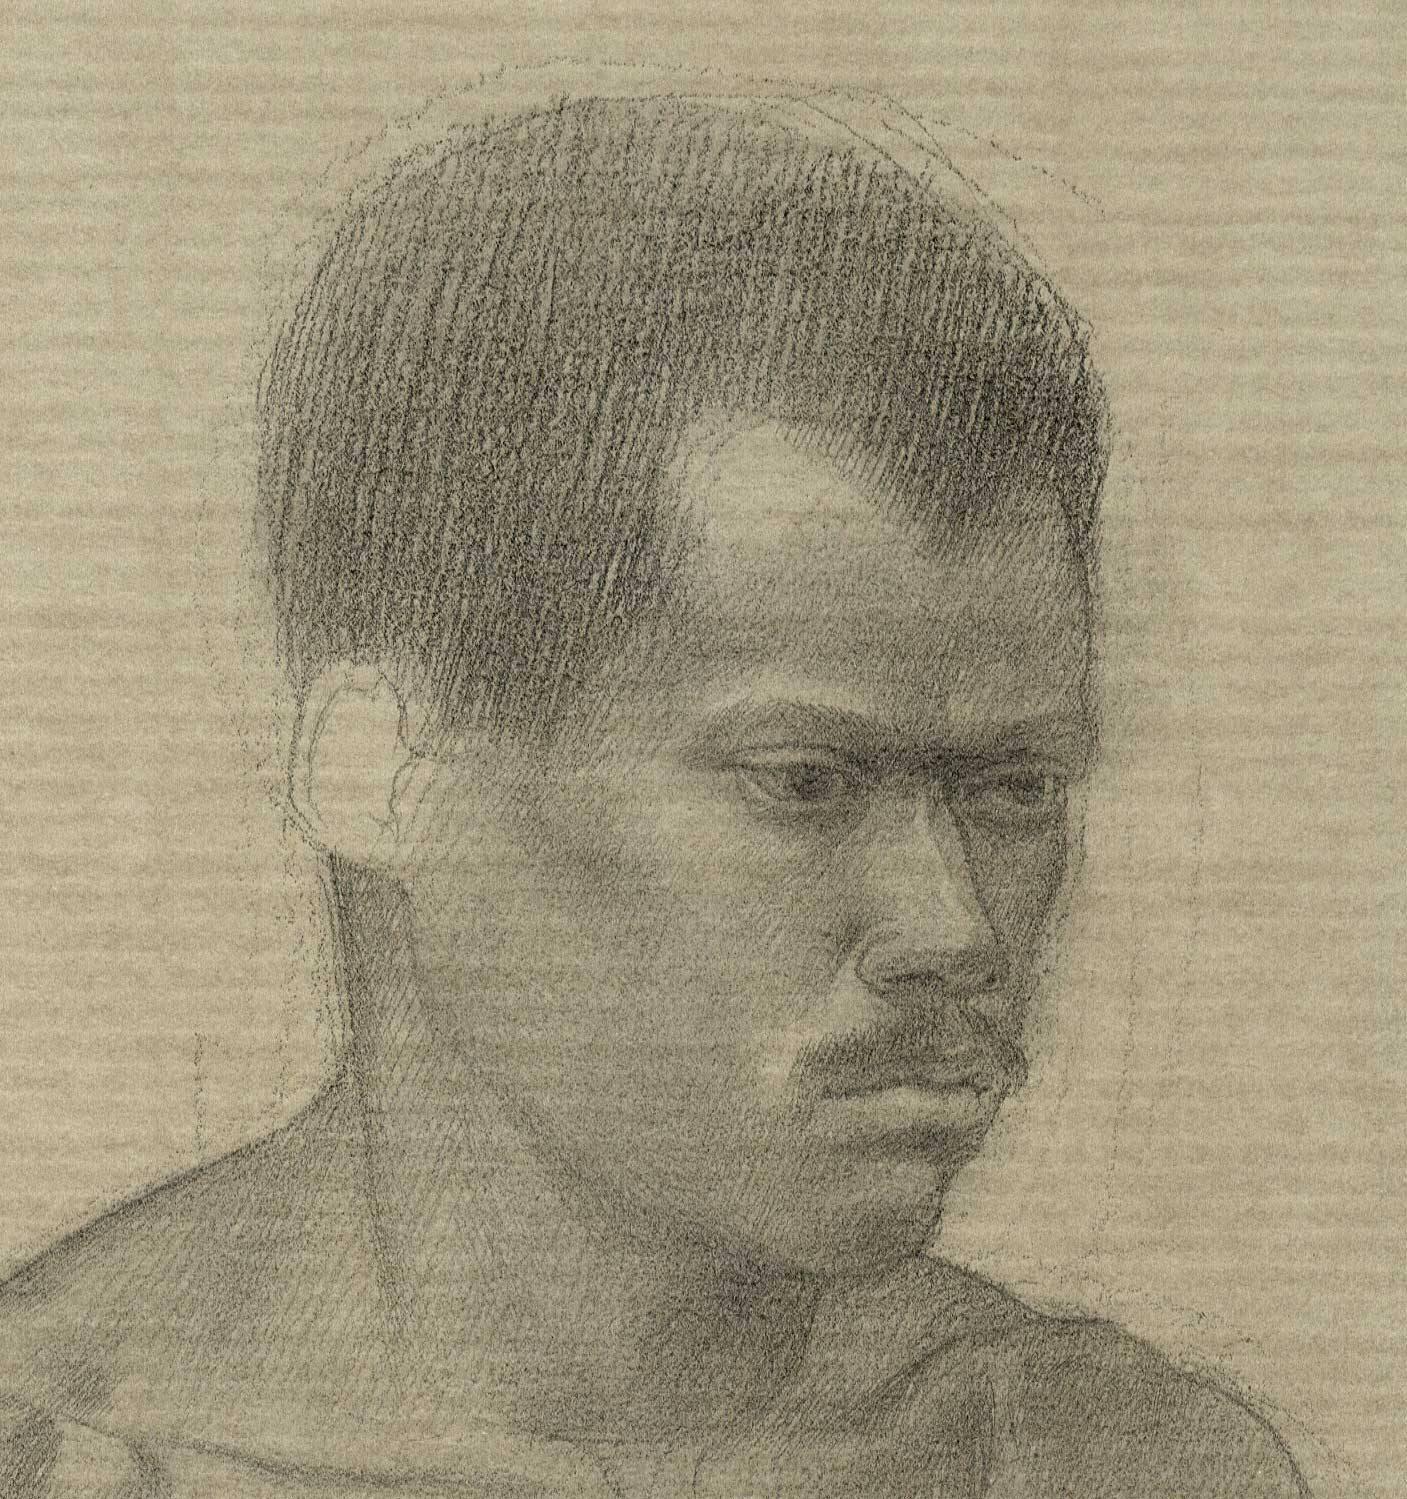 Man of Color (pencil drawing of a nude black man) - Art by Martha Erlebacher